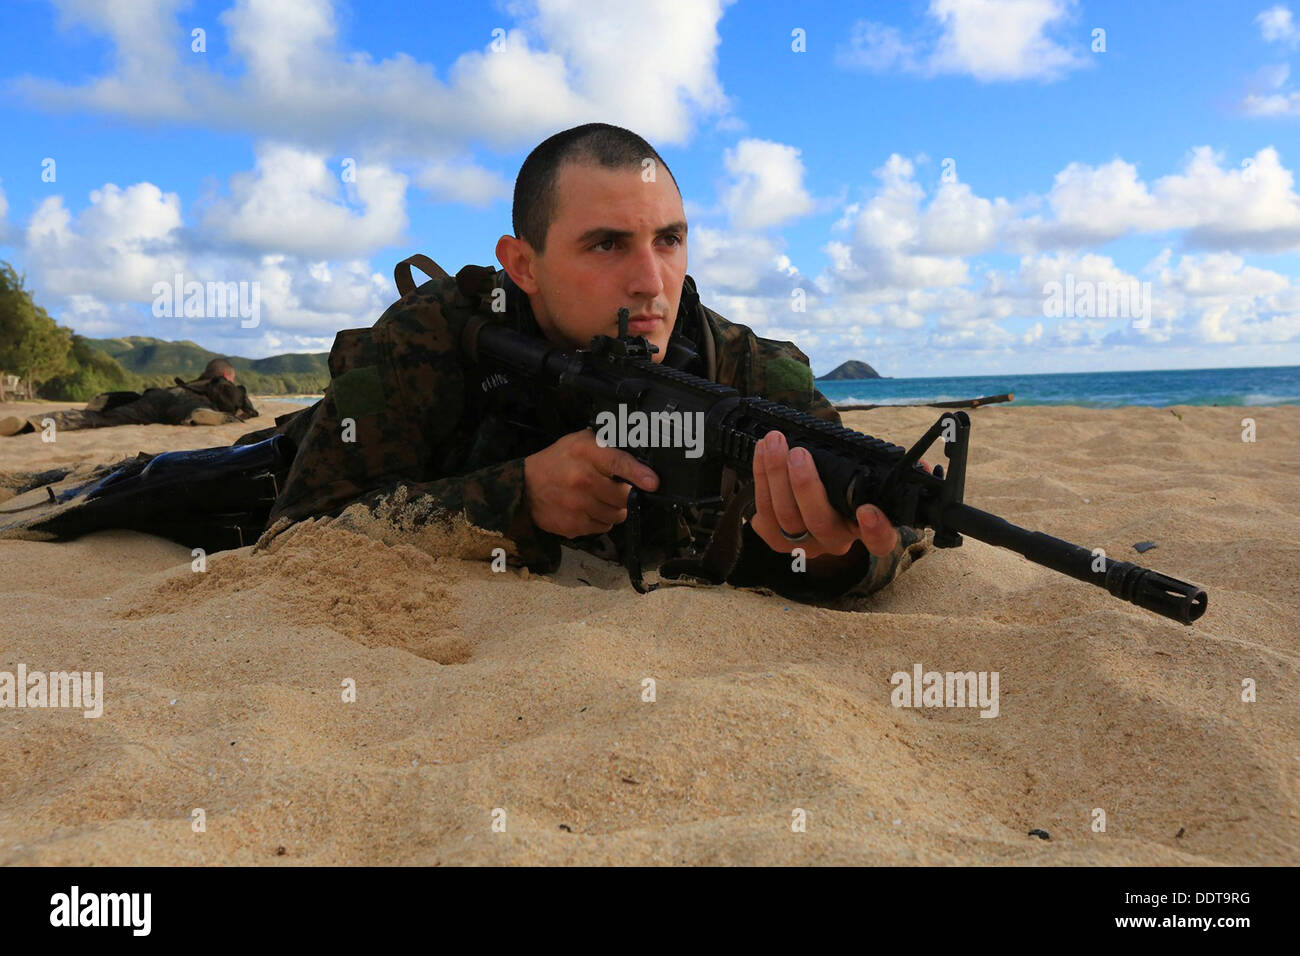 A US Marine special operations Force Reconnaissance commando wade ashore at Bellows Beach during sustainment training August 31, 2013 on Oahu, Hawaii. Stock Photo